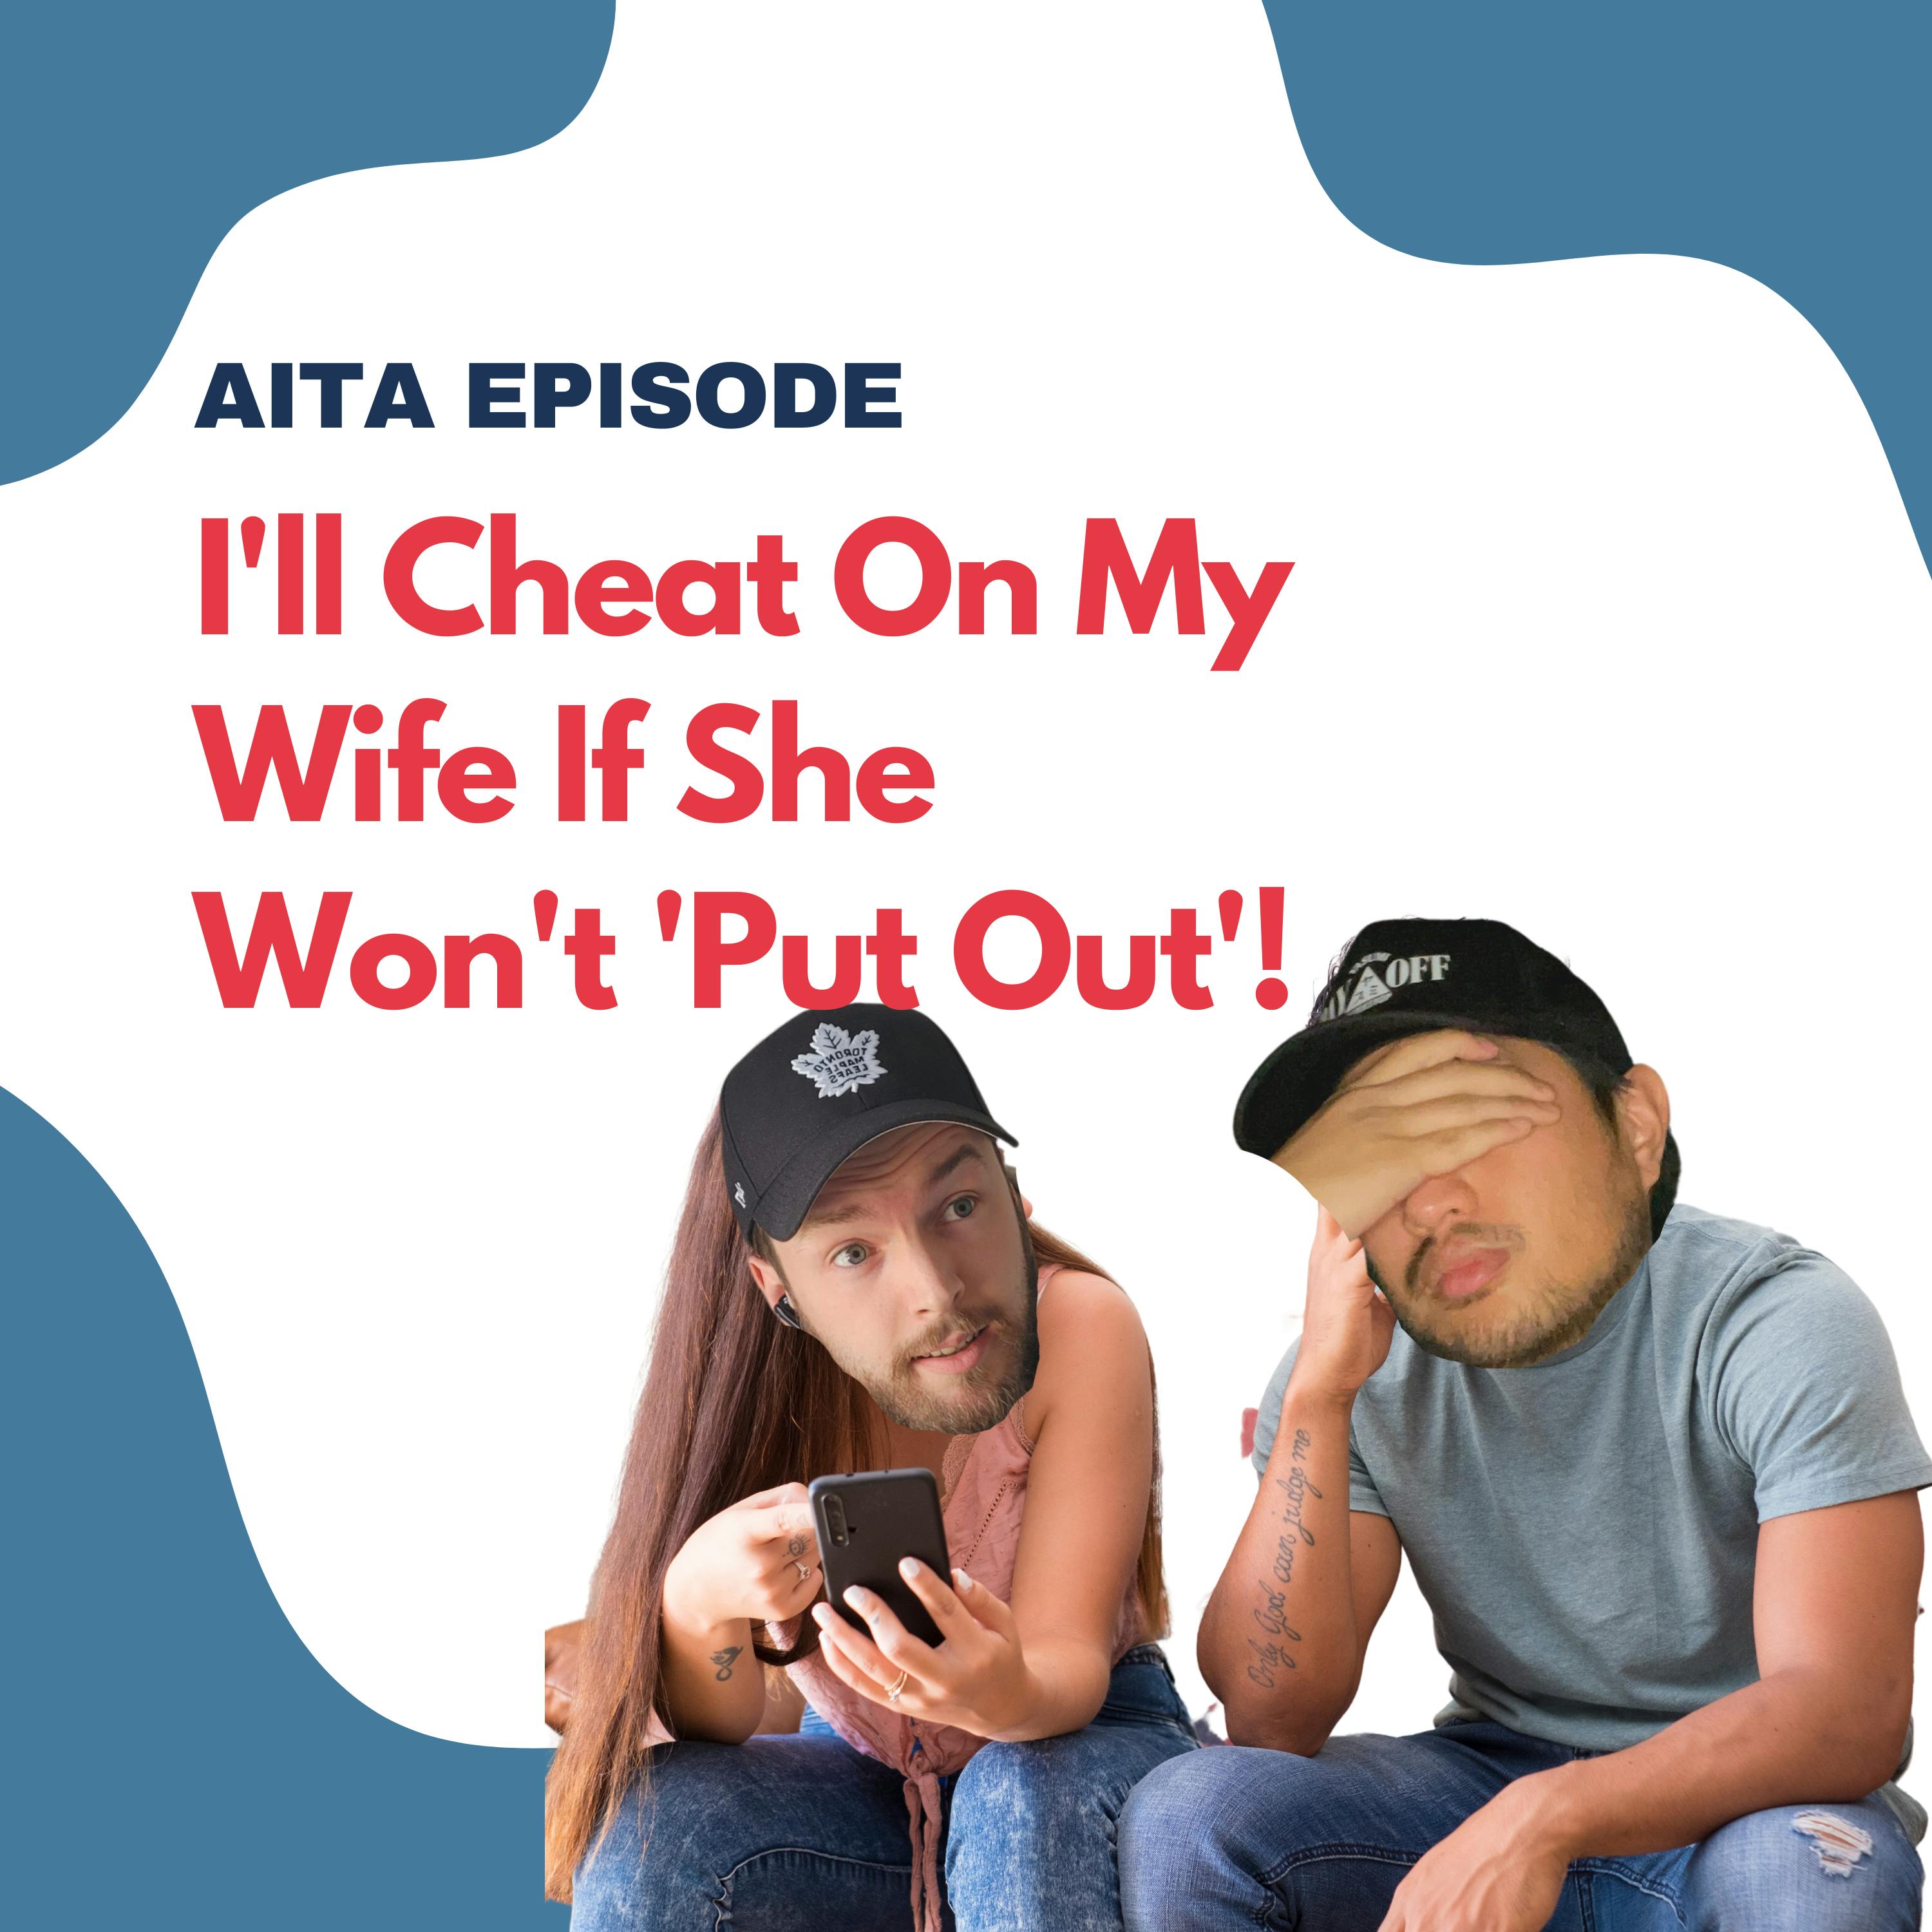 Am I The Asshole | I'll Cheat On My Wife If She Won't 'Put Out'!